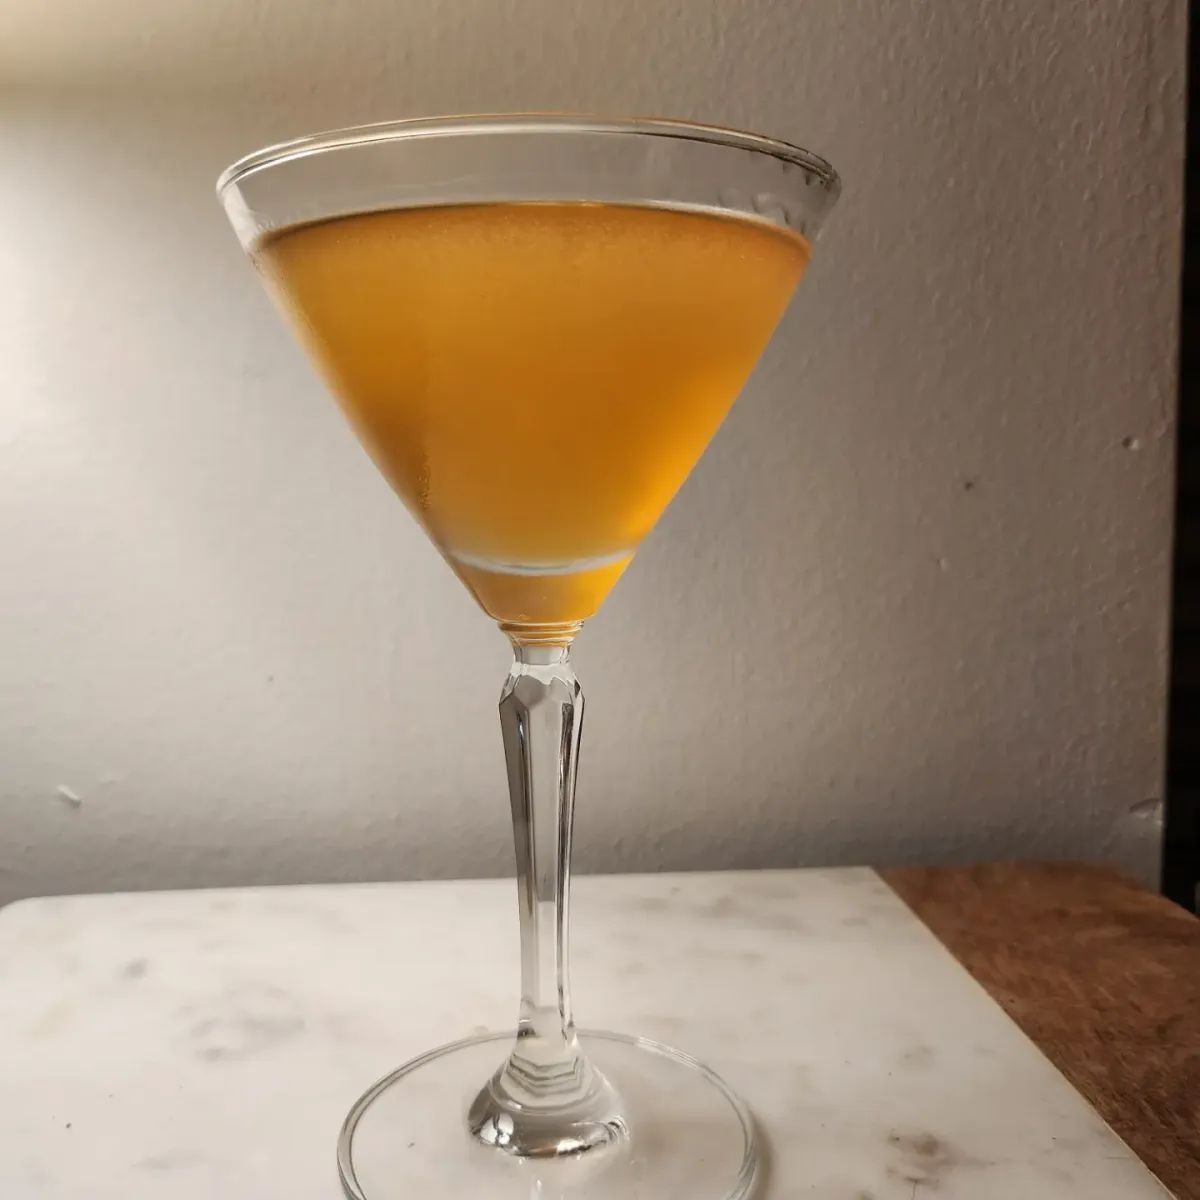 Hello friends! Tonight I have another cocktail from a long-closed venue, this one is a very orange 